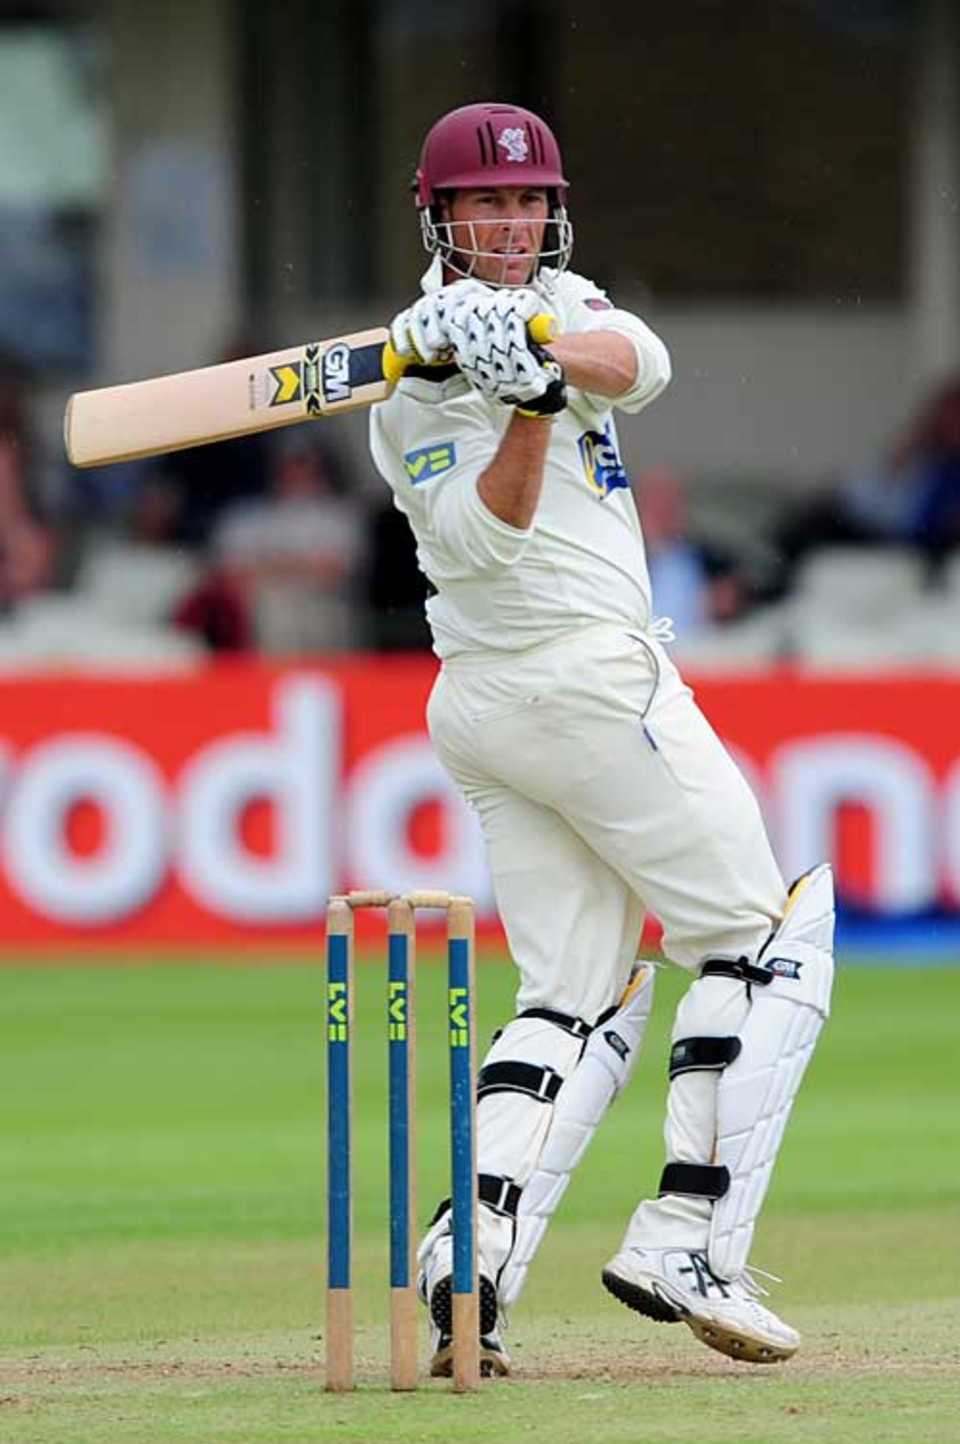 Marcus Trescothick led the way for Somerset